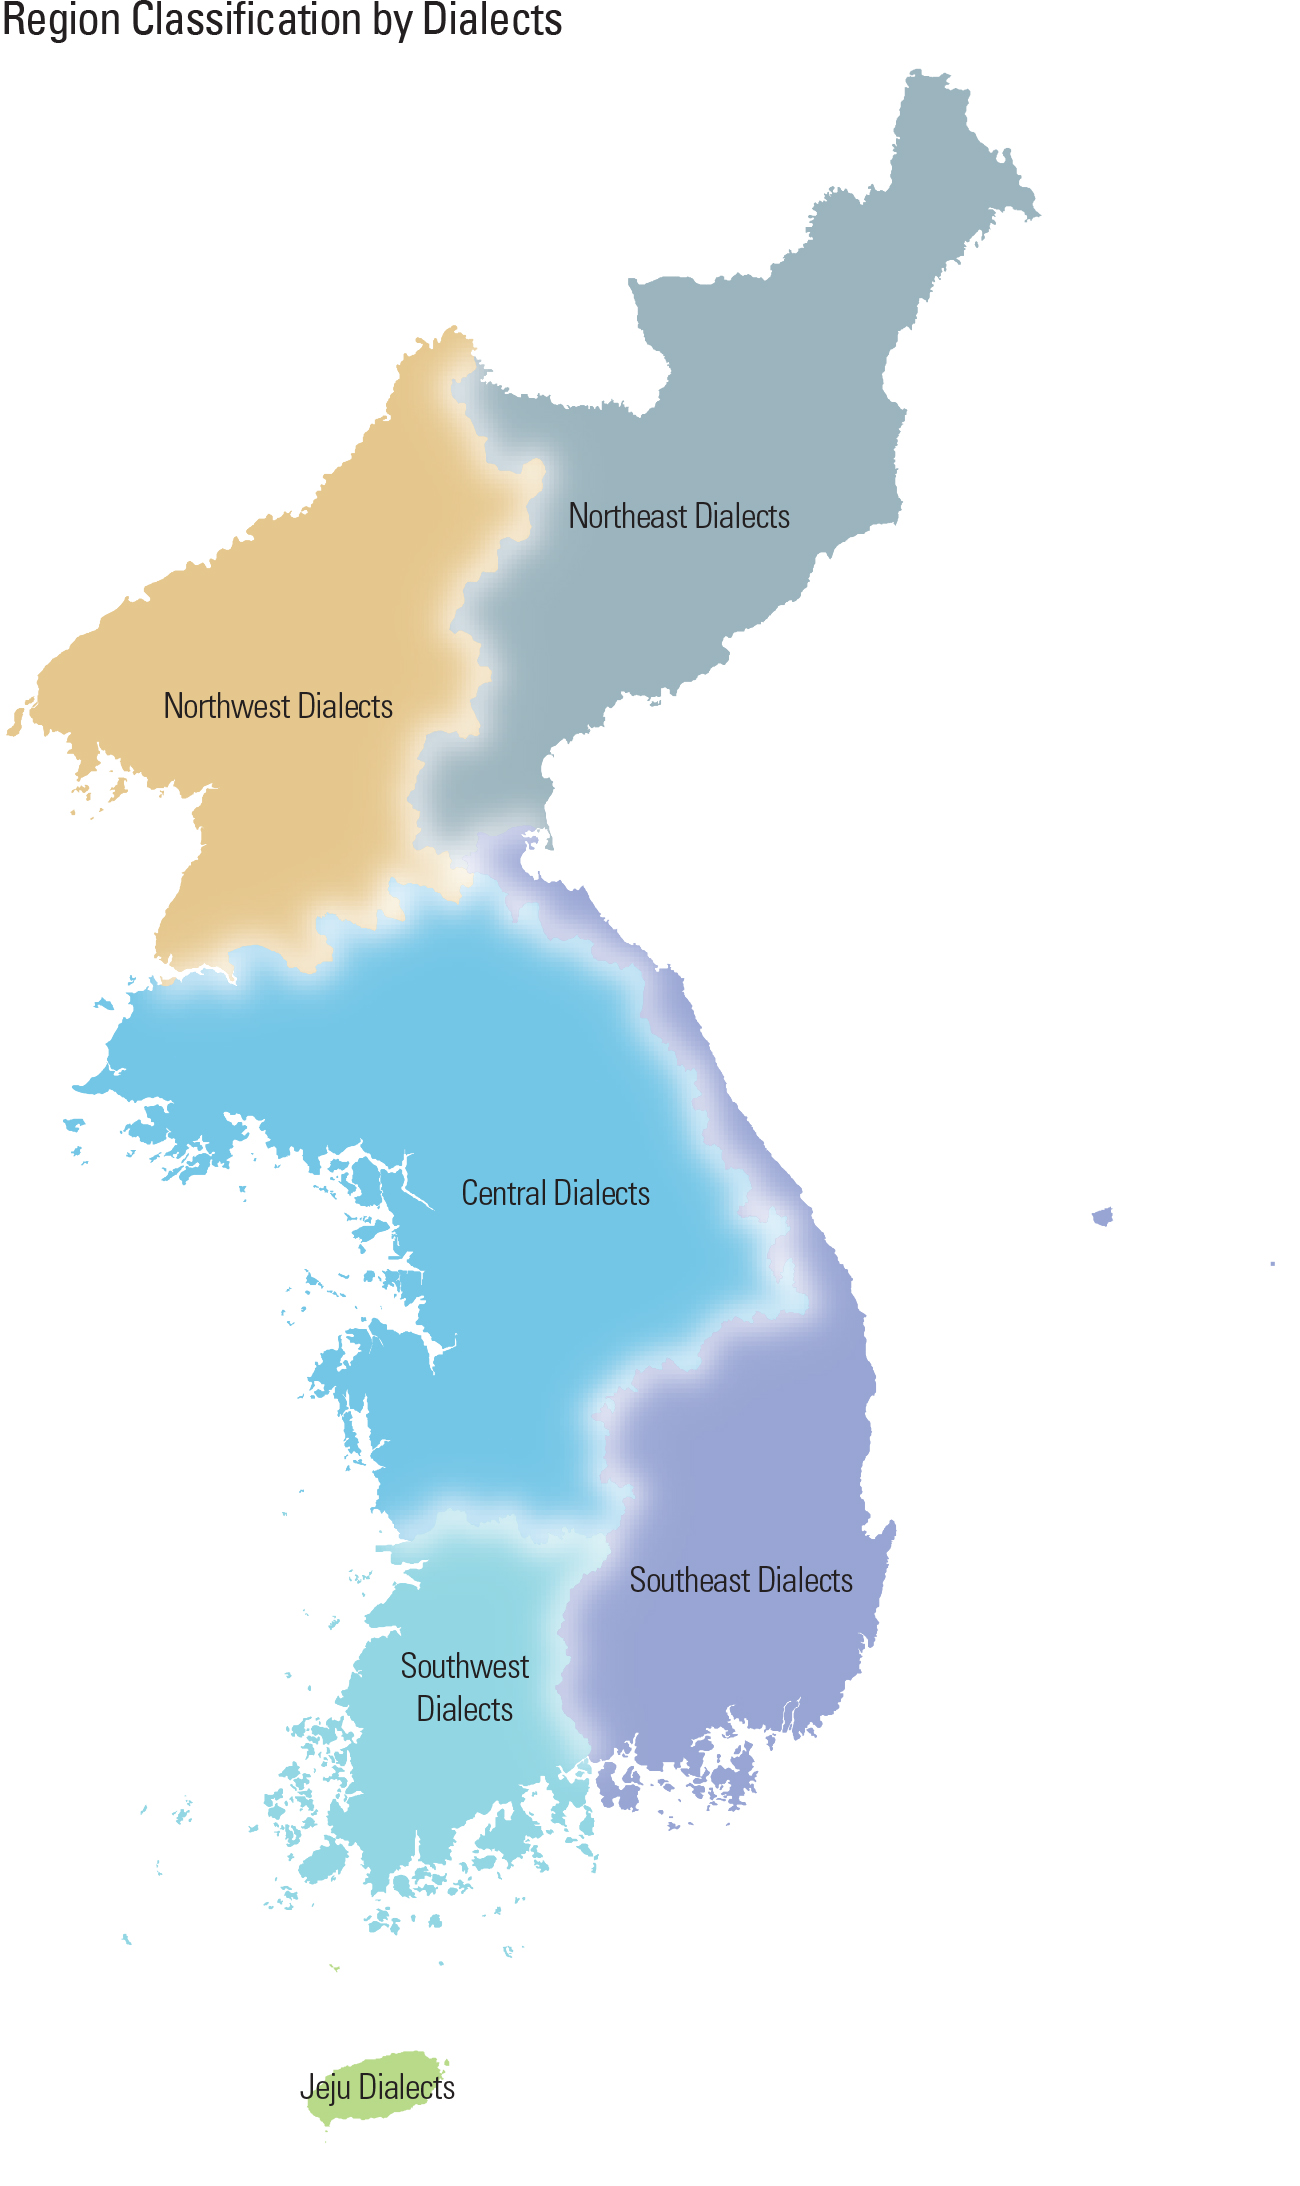  Region Classification by Dialects